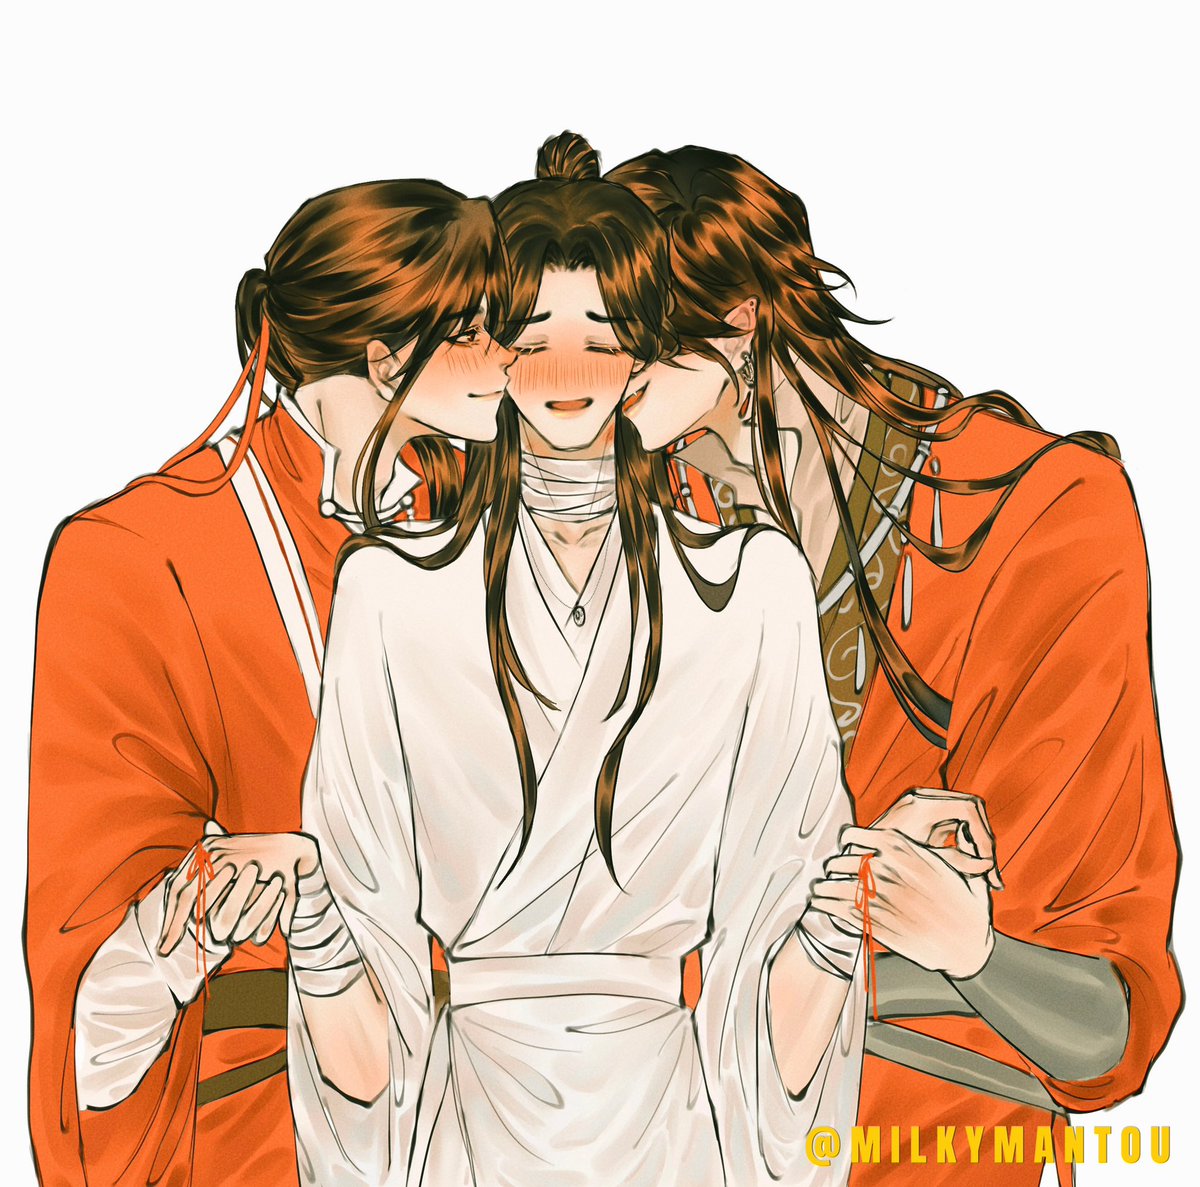 Which one you prefer, me or... him?

#TGCF #HeavenOfficialsBlessing #HuaLian